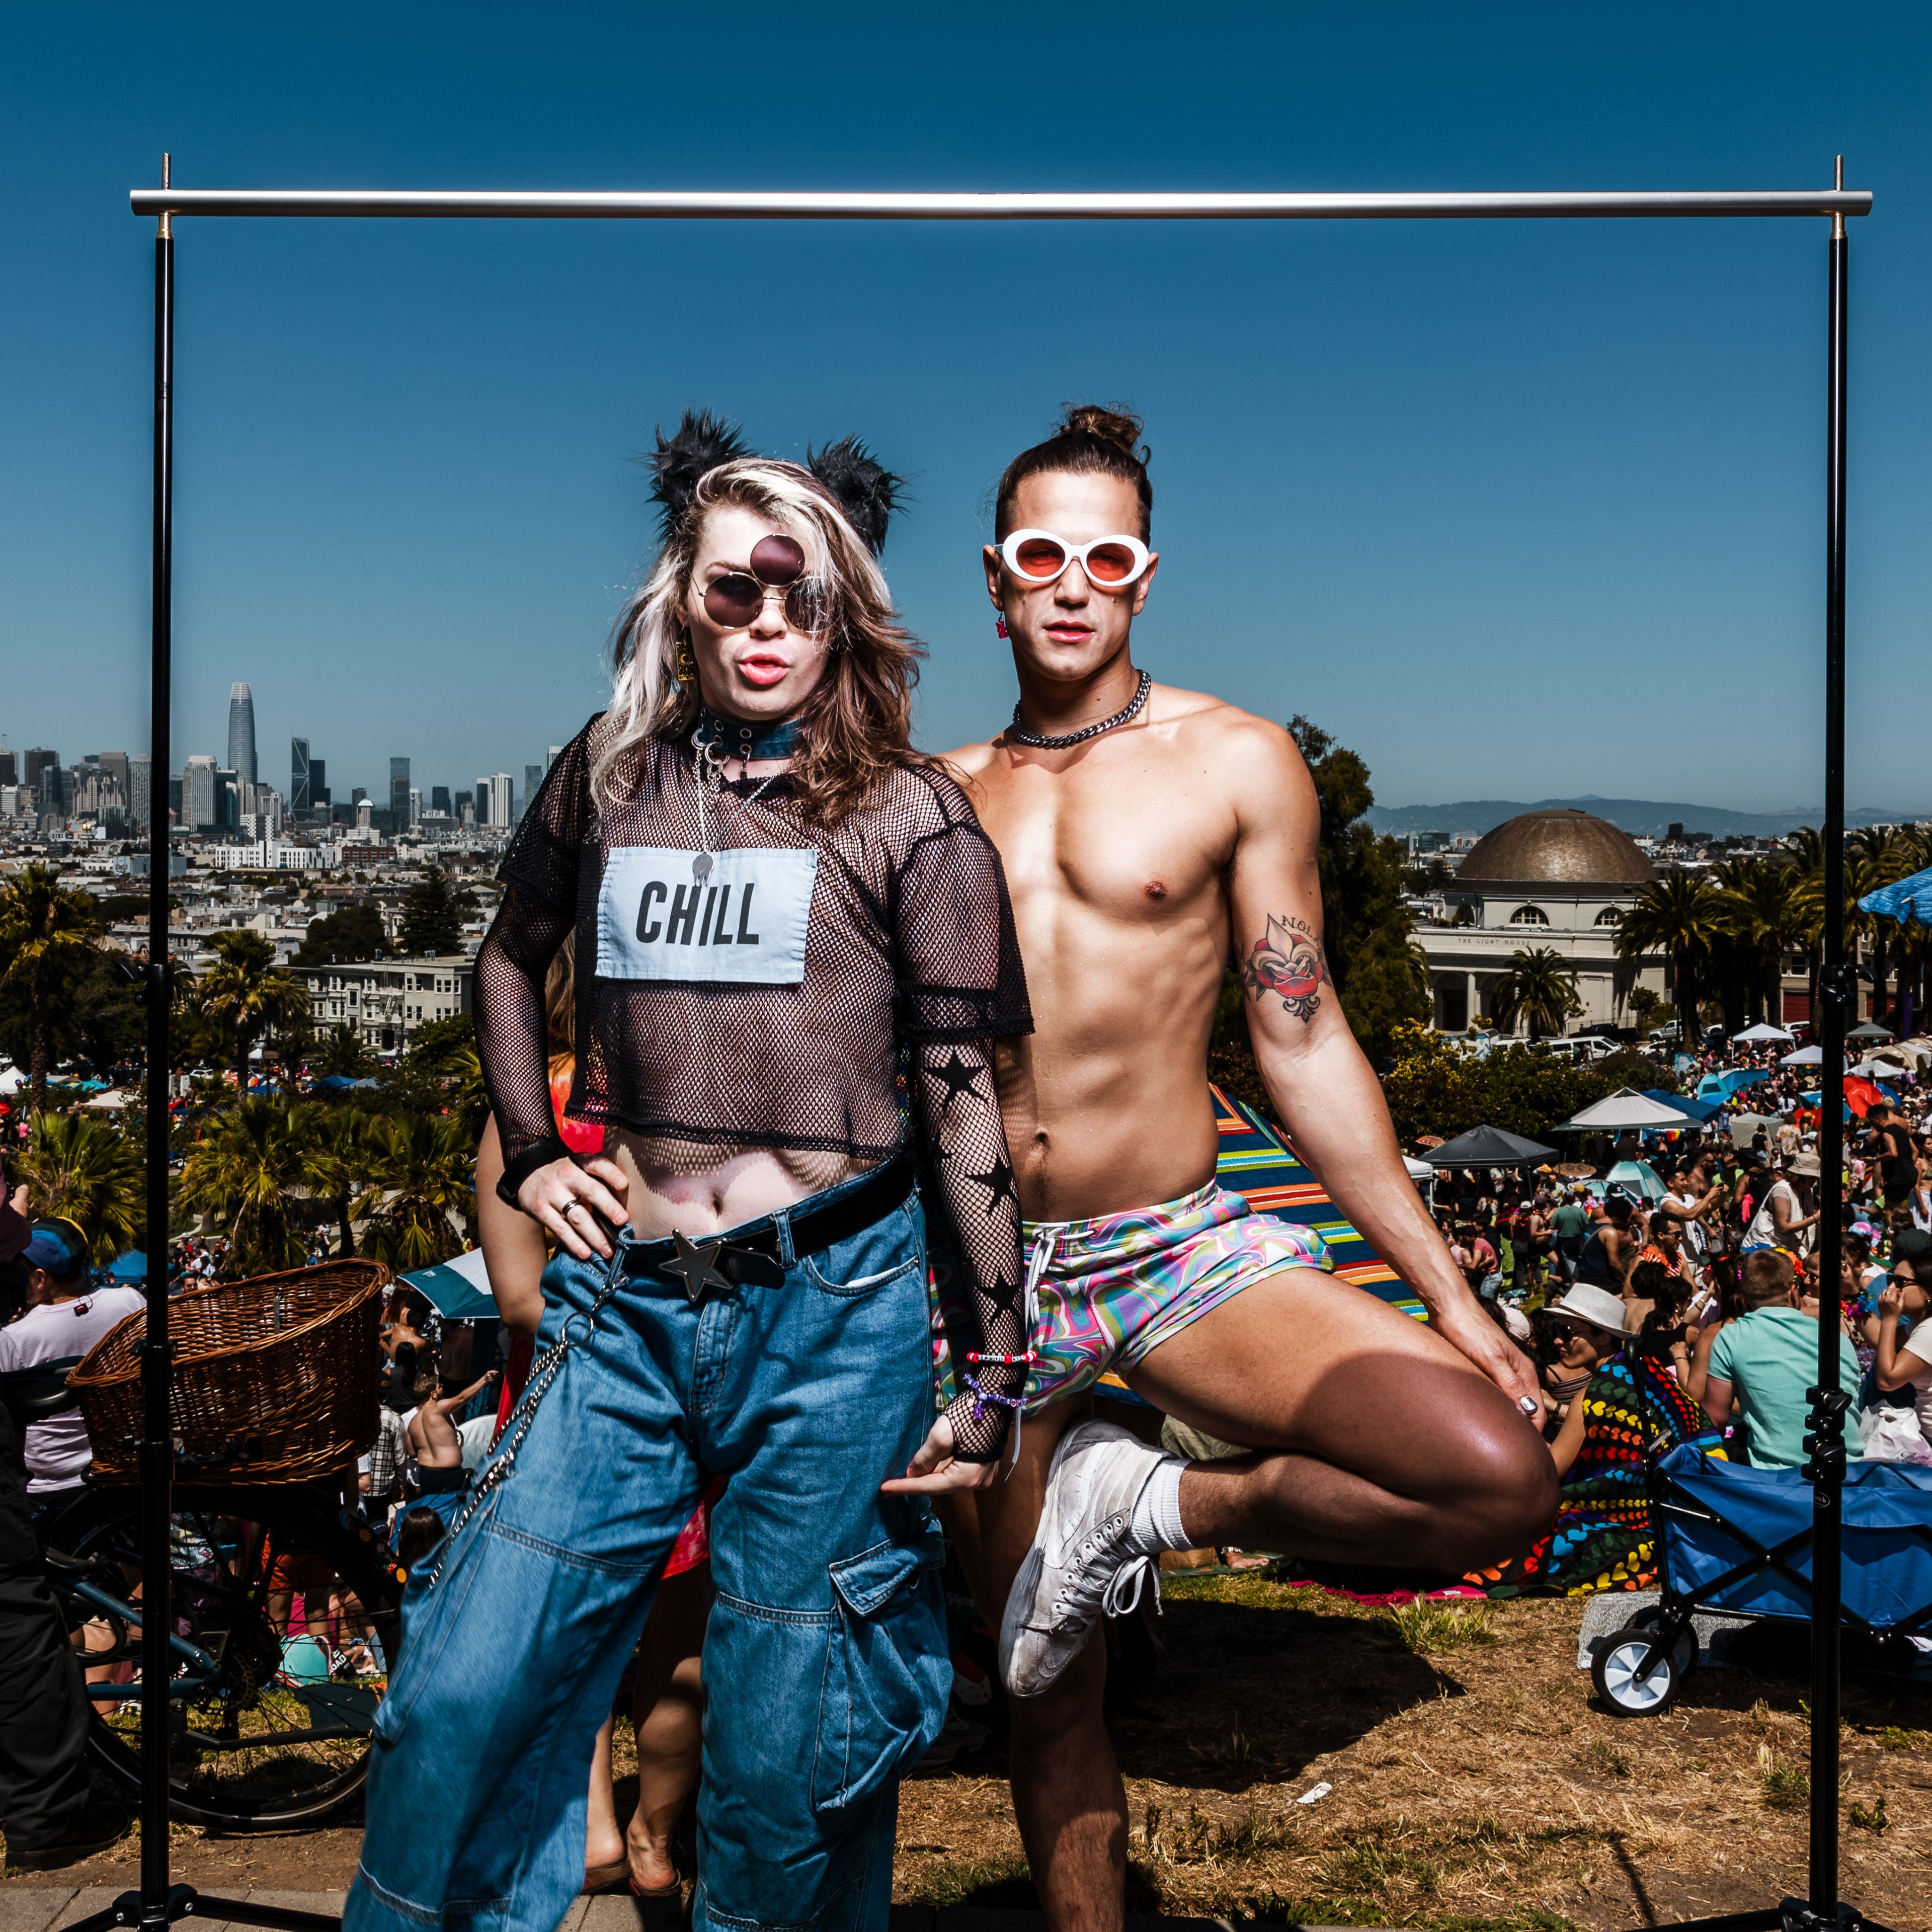 Two individuals pose in colorful outfits at an outdoor event with a city skyline in the background. One wears a &quot;CHILL&quot; shirt, jeans, and cat ears; the other is shirtless in shorts.